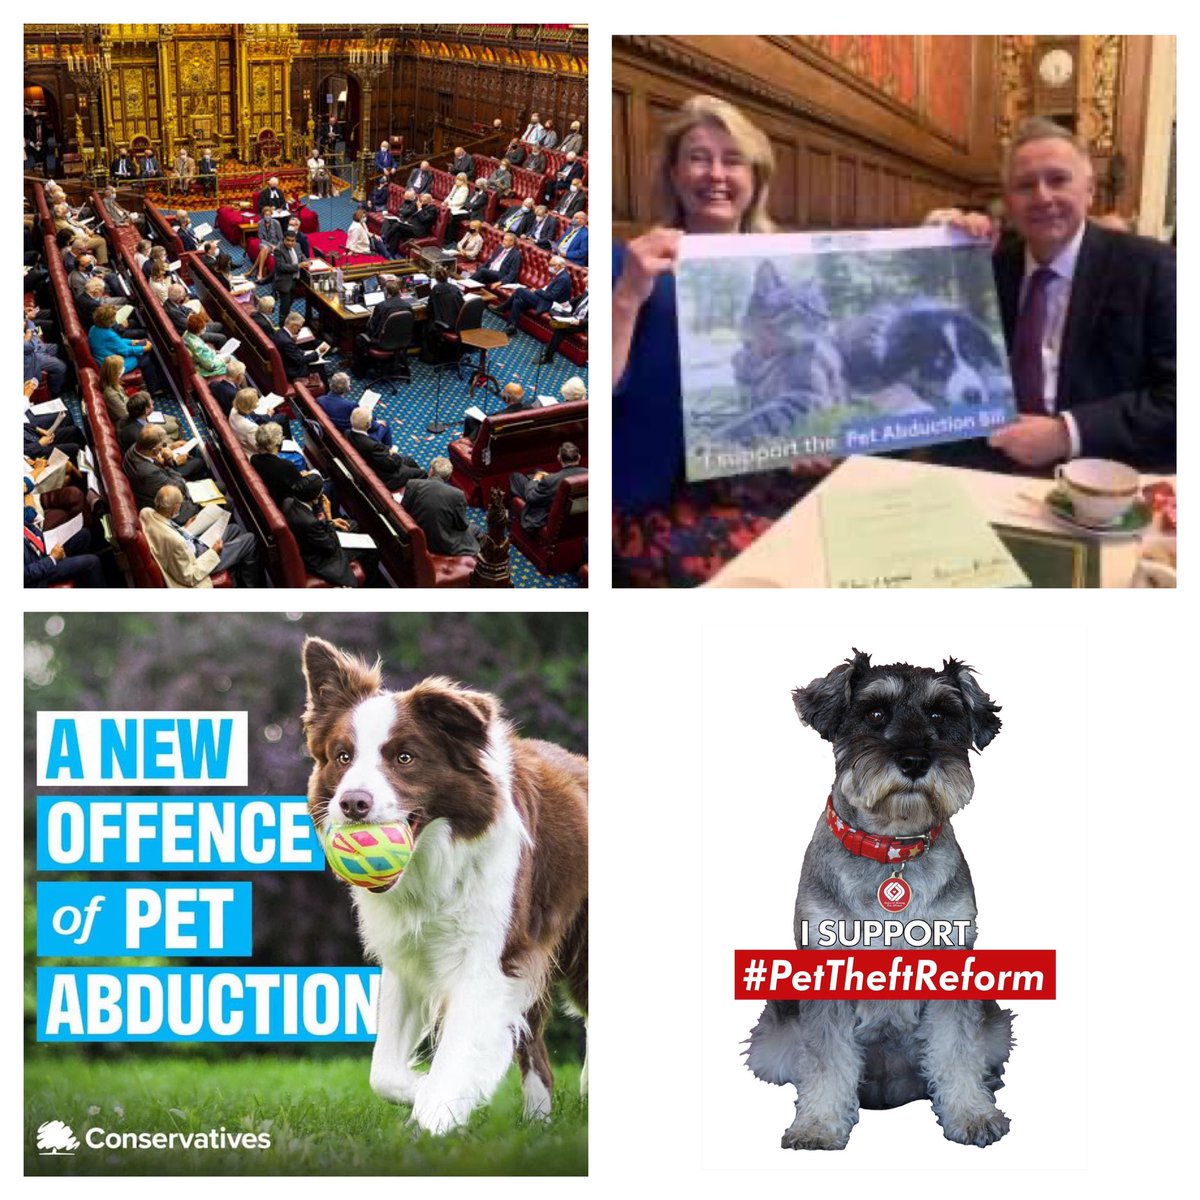 The #PetAbductionBill moves another step forward today 🙏🏻 2nd Reading @UKHouseofLords Thank you @Anna_Firth and Lord Black for your work on #PetAbduction We hope the Bill moves quickly to get onto the Statute Book Link to watch live: parliamentlive.tv/Event/Index/c3… #PetTheftReform